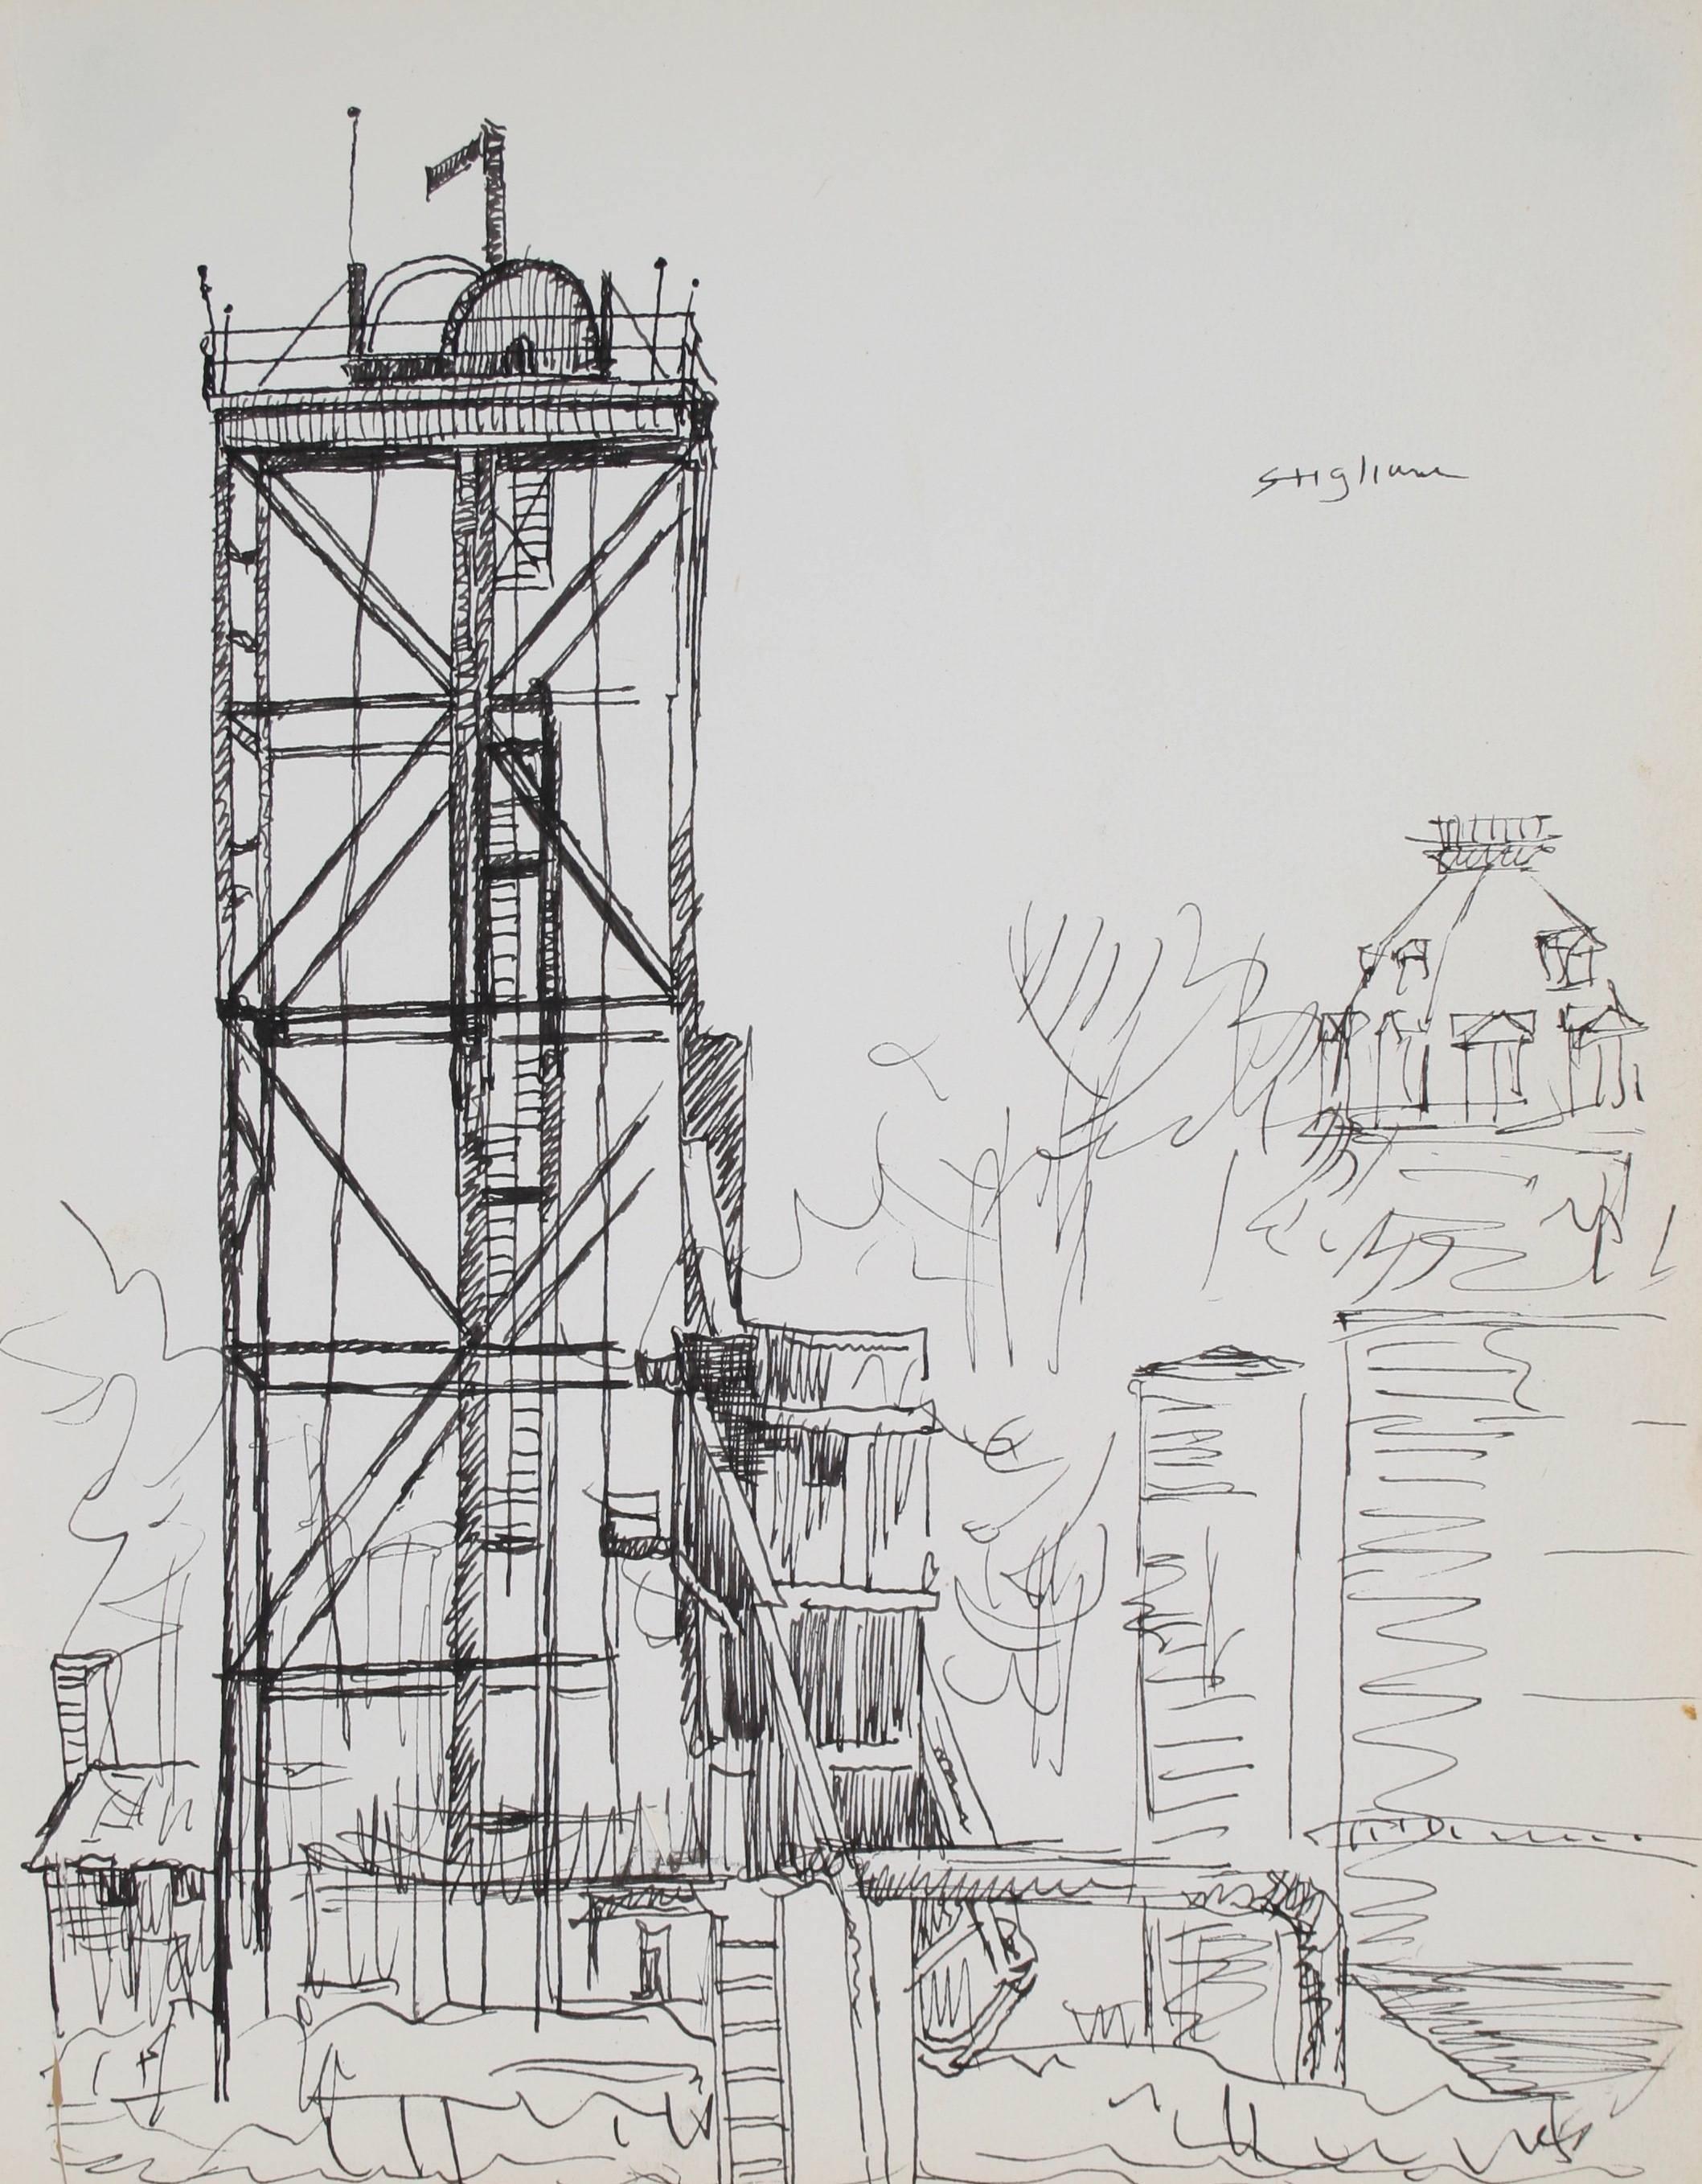 New York Industrial Scene, Ink on Paper Drawing, Mid 20th Century - Art by Pasquale Patrick Stigliani